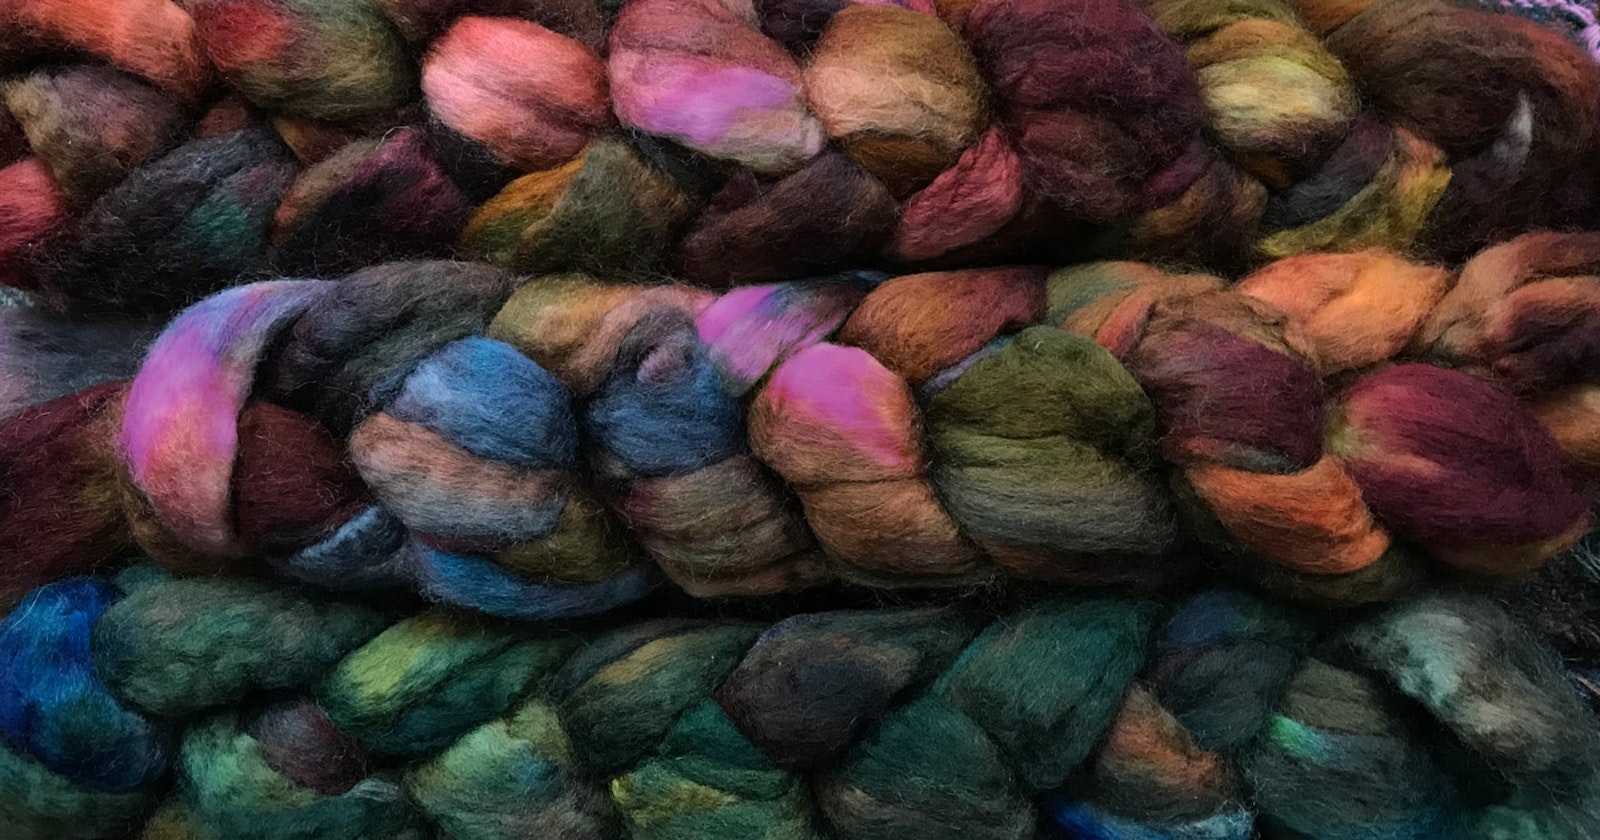 Spinning Novelty Yarn: Tips and Techniques for Creating Art Yarn